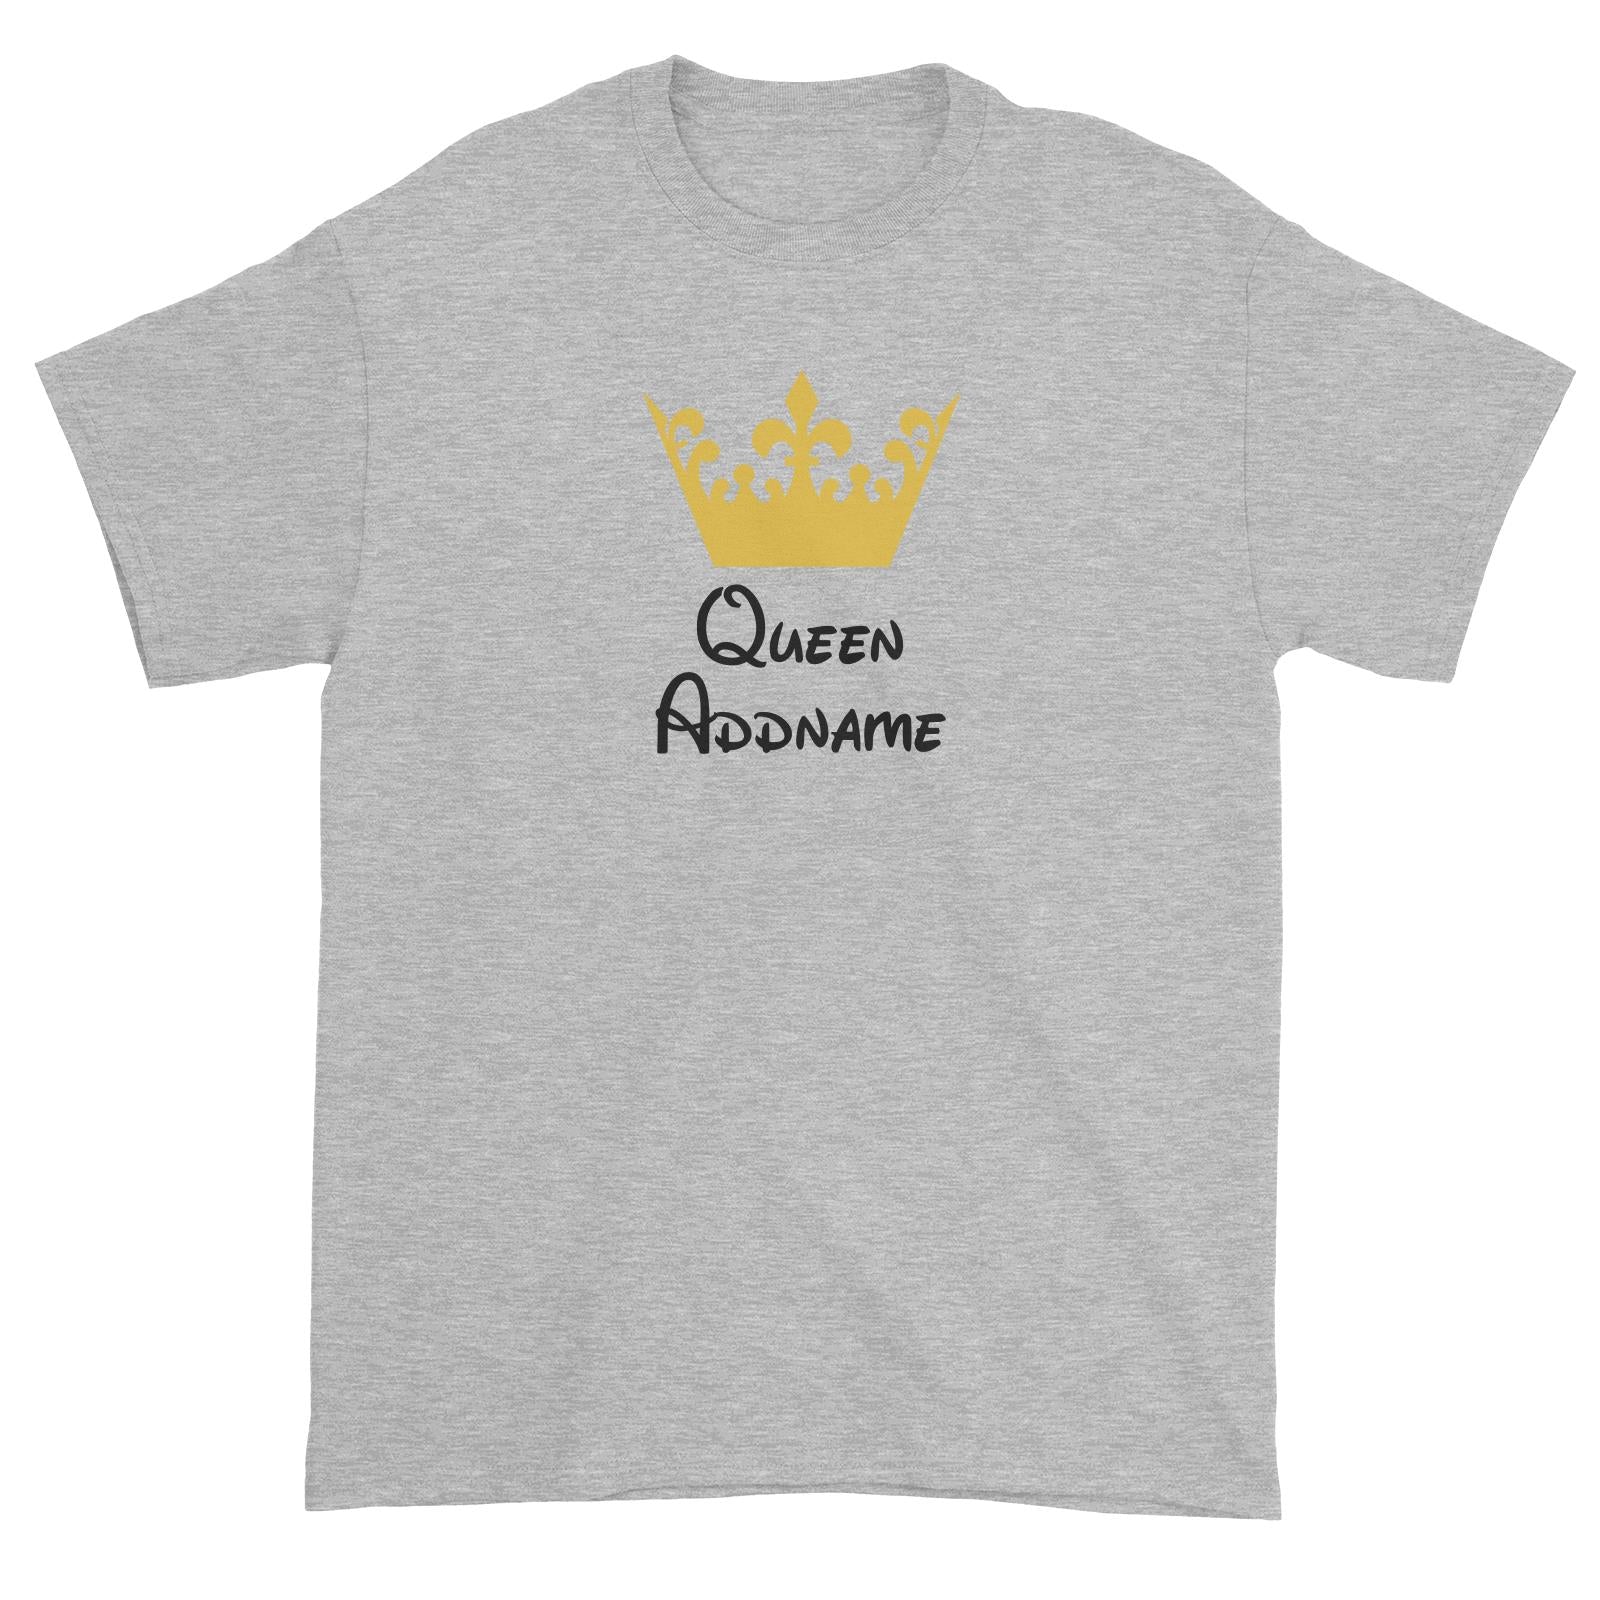 Royal Queen with Tiara Addname Unisex T-Shirt